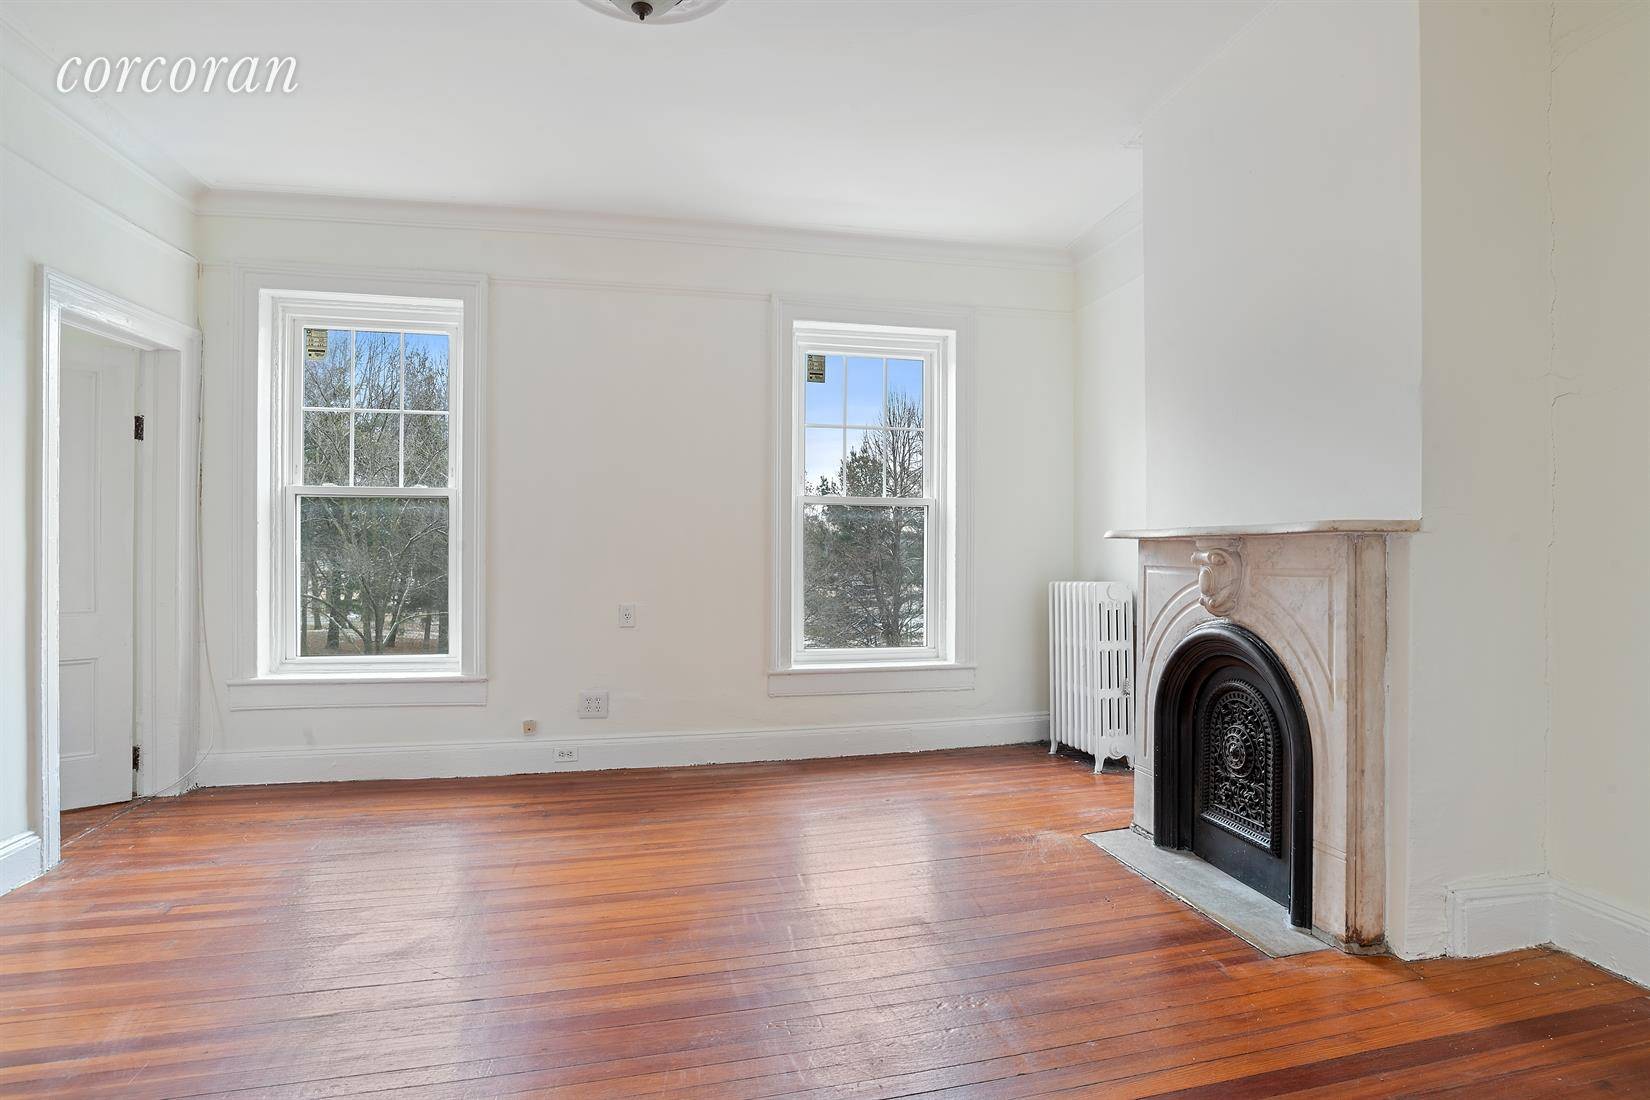 Live right across majestic Prospect Park in this circa 1840 historic property.